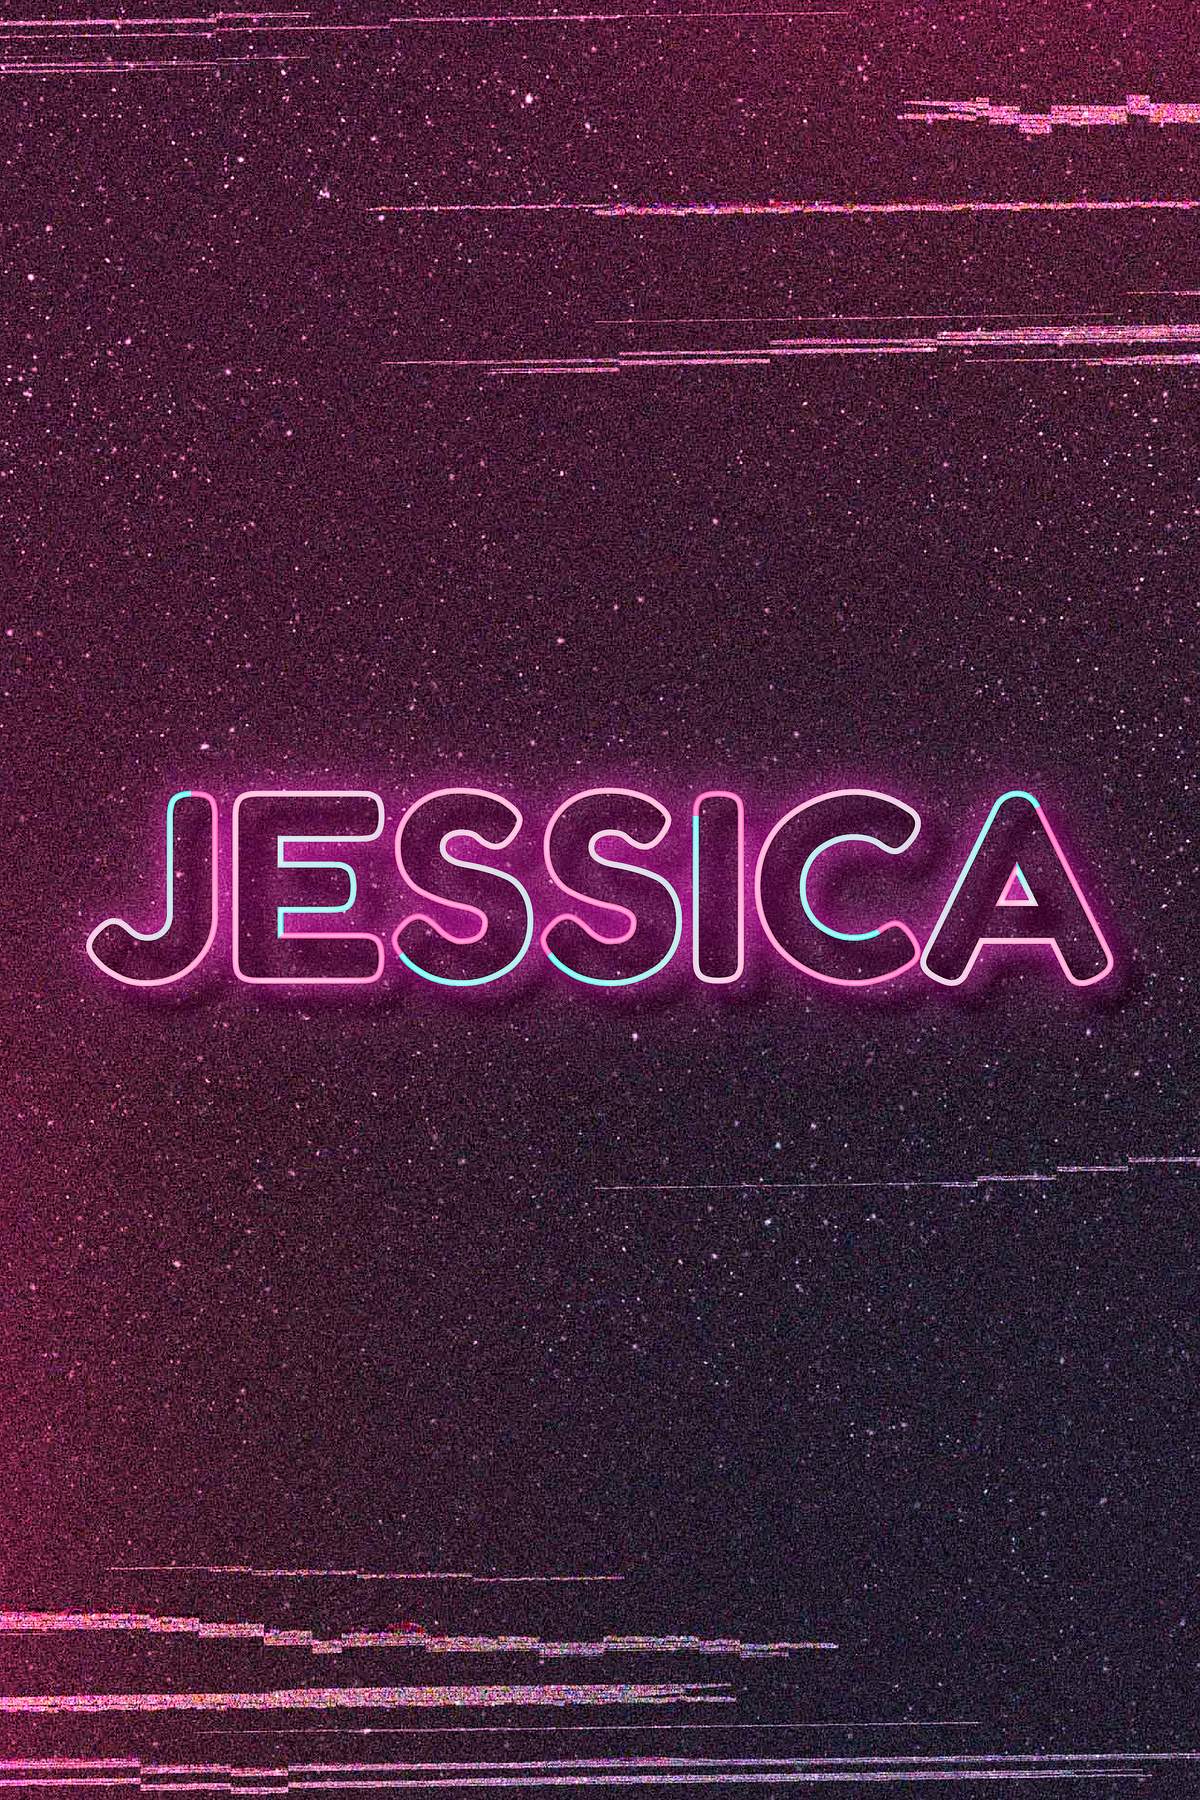 Jessica Word Art Vector Neon Typography Royalty Free Stock Illustration High Resolution Graphic